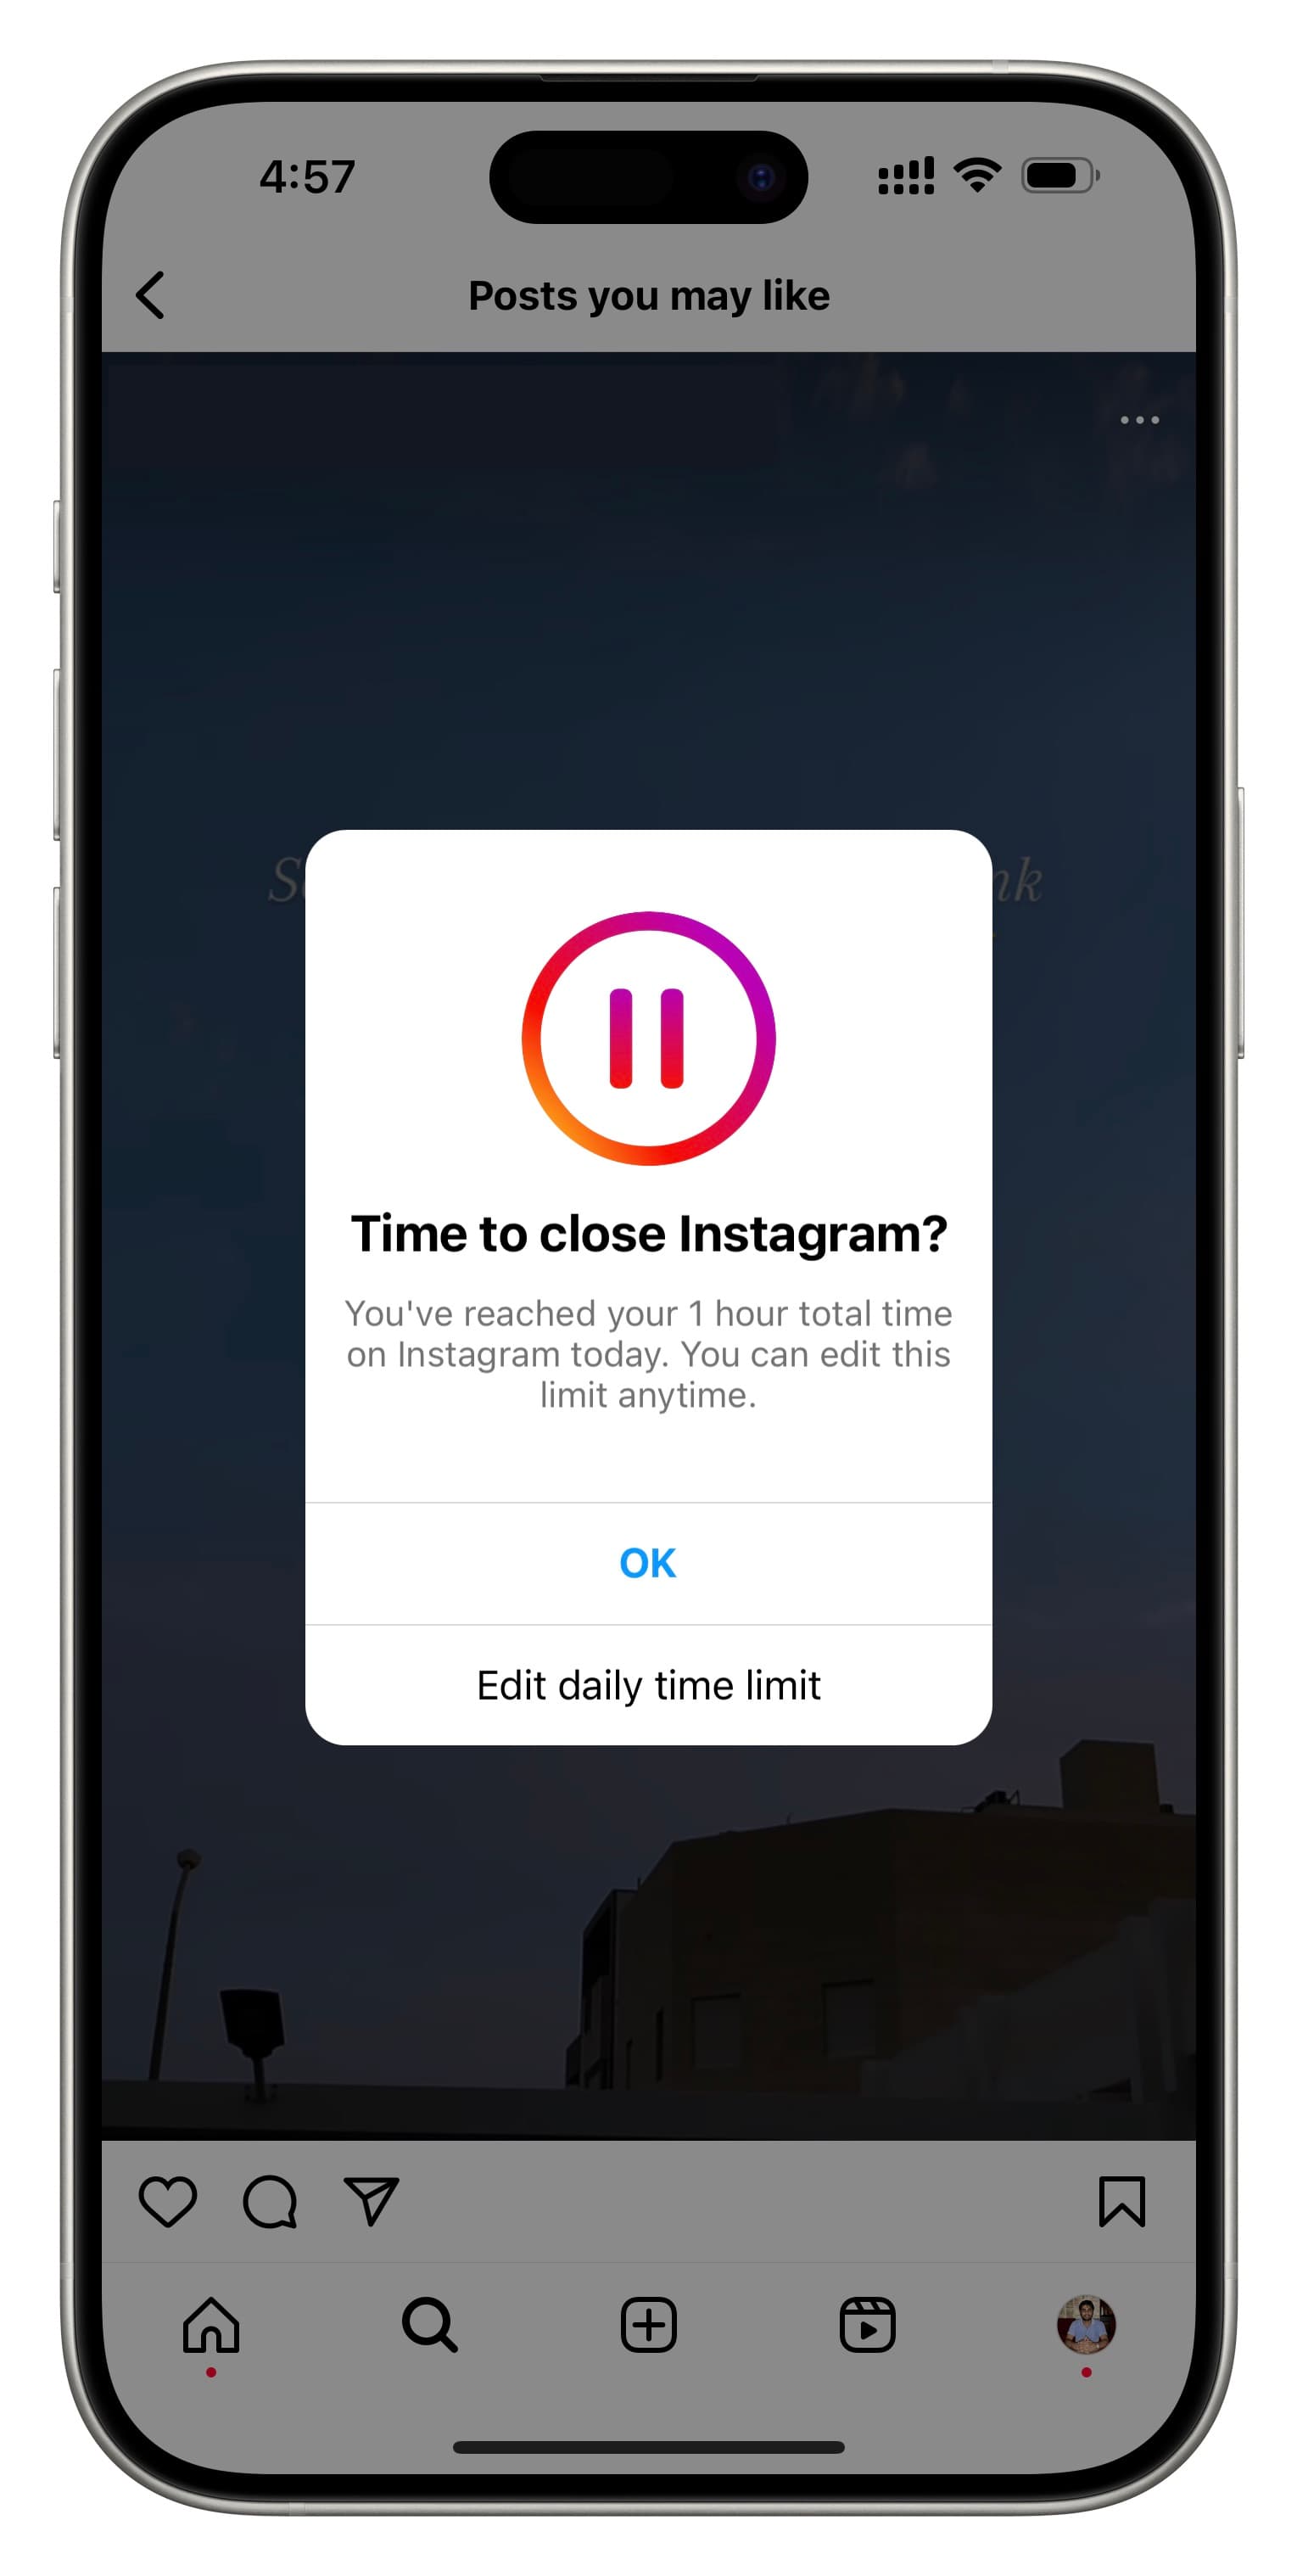 Time to close Instagram message alert on the screen